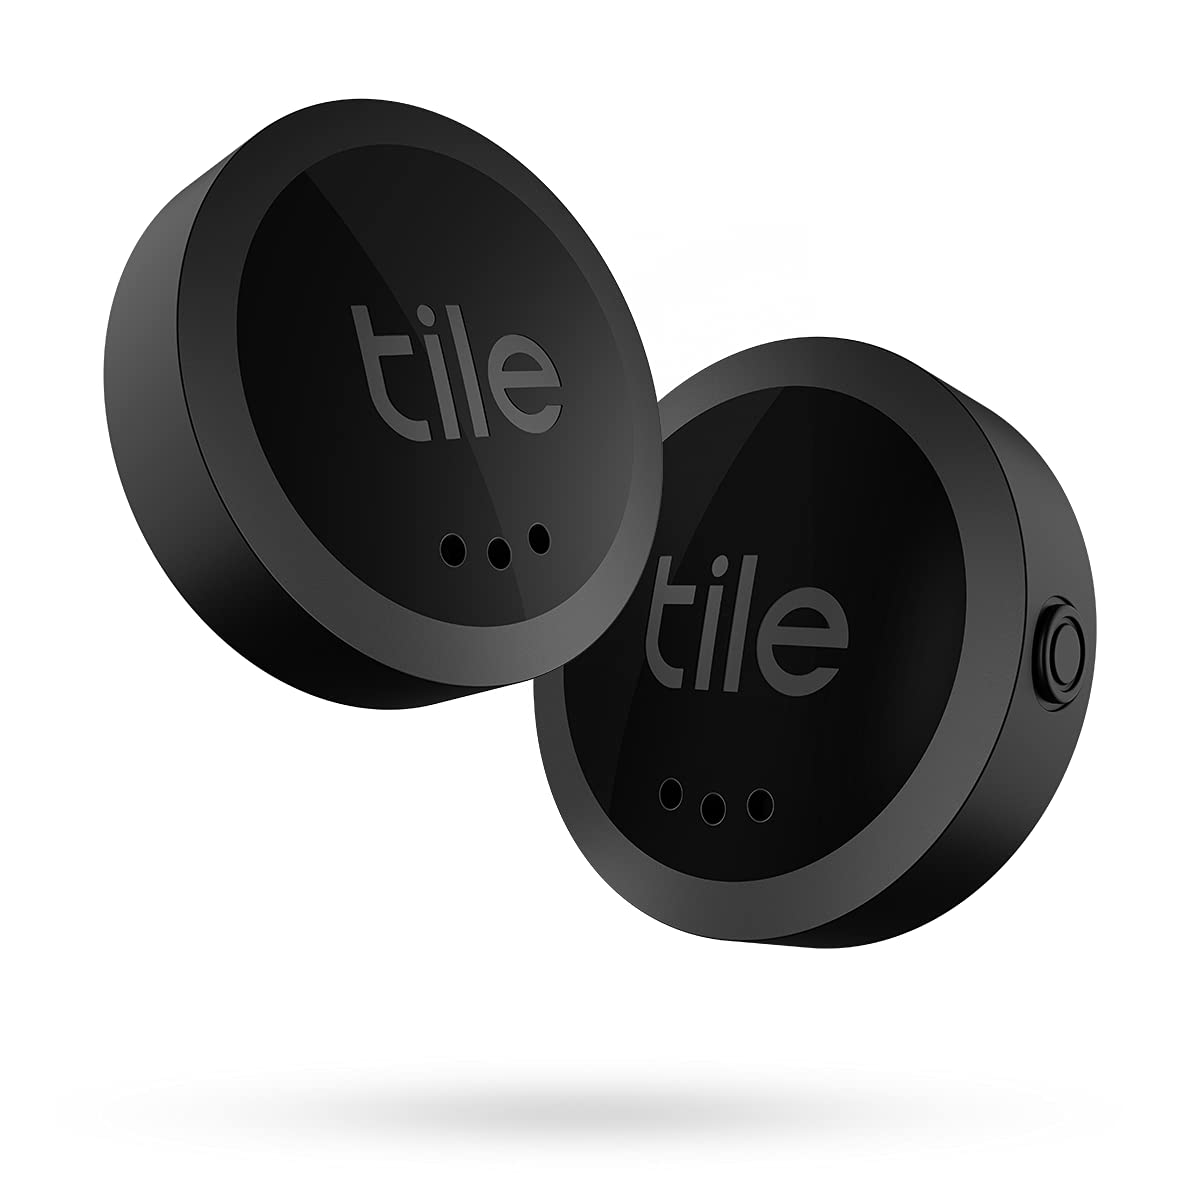 Tile Sticker 2-Pack. Small Bluetooth Tracker, Remote Finder and Item Locator, Pets and More; Up to 250 ft. Range. Water-Resistant. Phone Finder. iOS and Android Compatible.